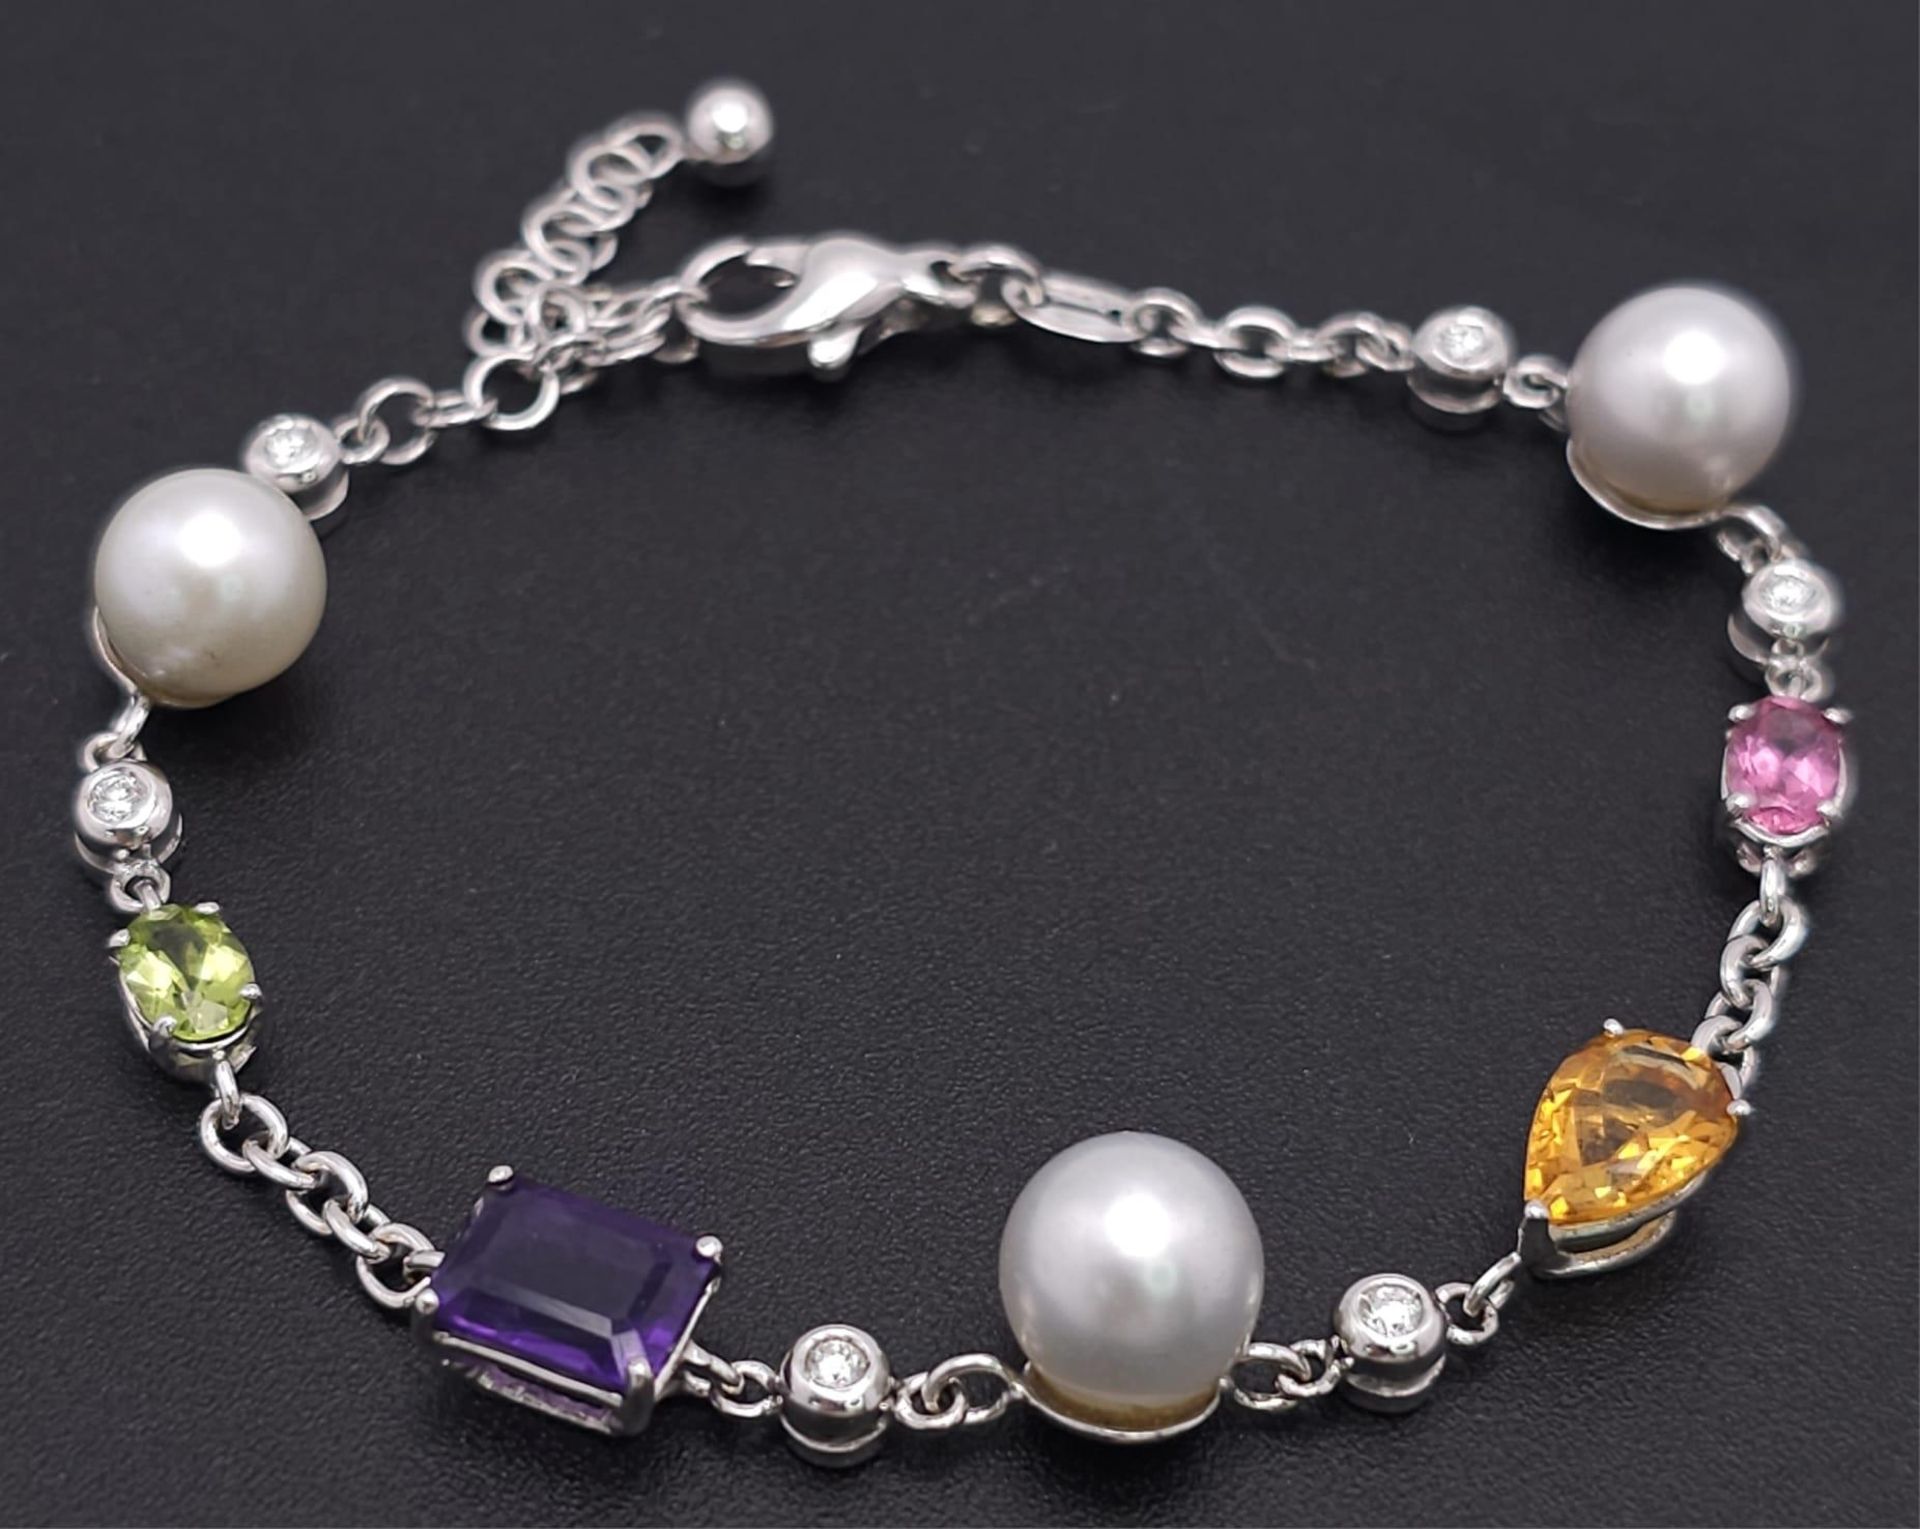 An 18 K white gold chain bracelet with a variety of gemstones (peridot, amethyst, citrine, etc)